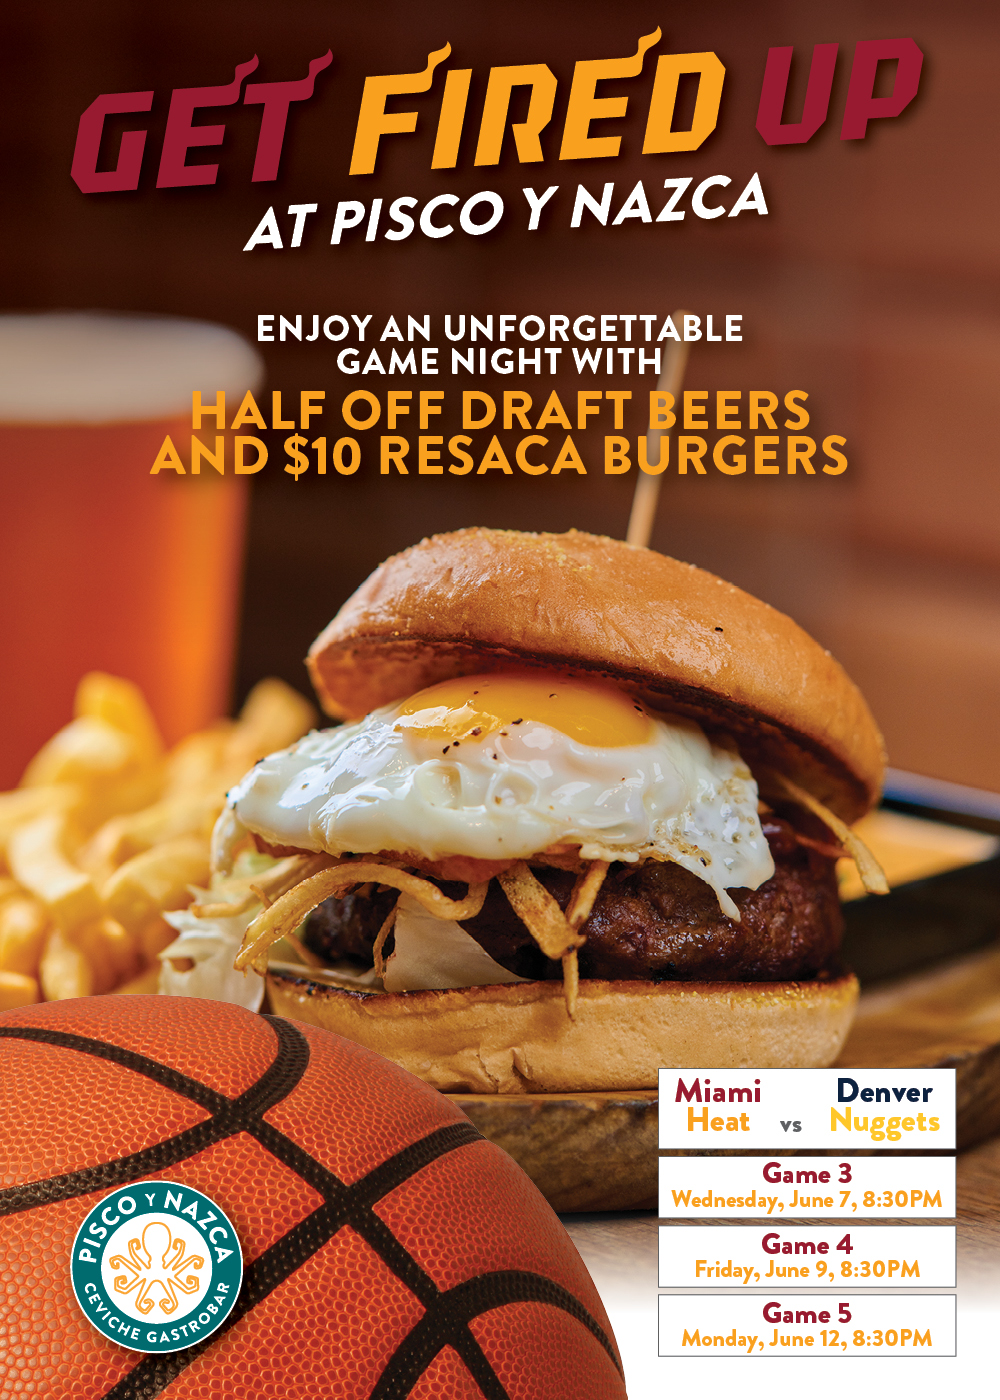 Pisco Y Nazca Ceviche Gastrobar GET FIRED UP! Enjoy an unforgettable game night with HALF OFF DRAFT BEERS AND $10. RESACA BURGERS